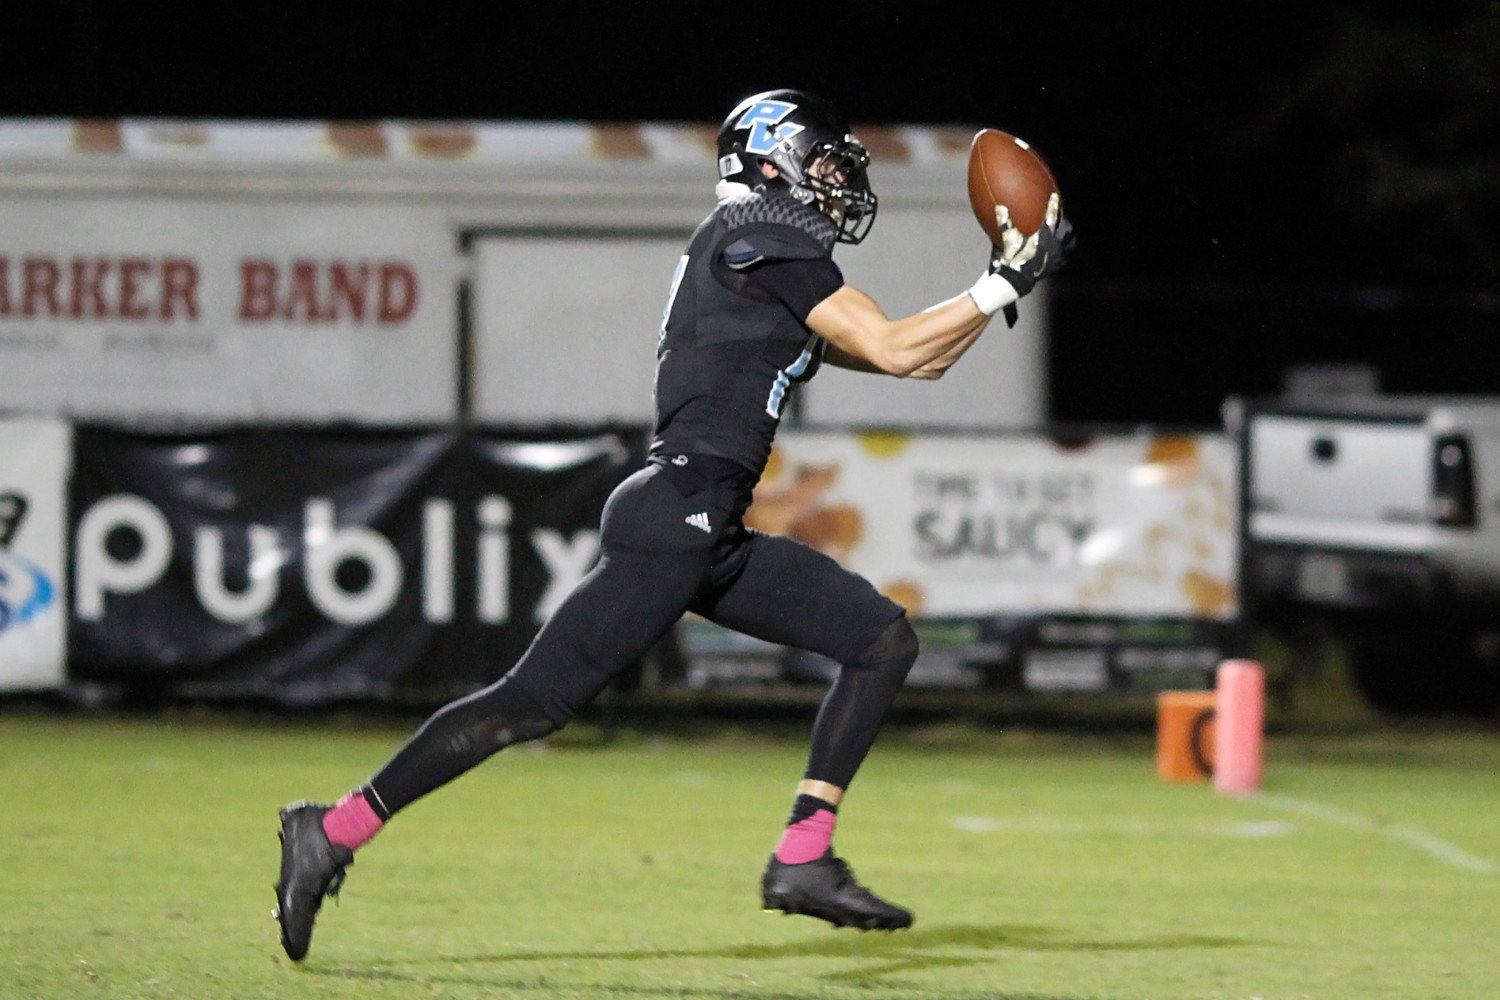 The Sharks’ Tommy Zitiello catches a pass in stride.